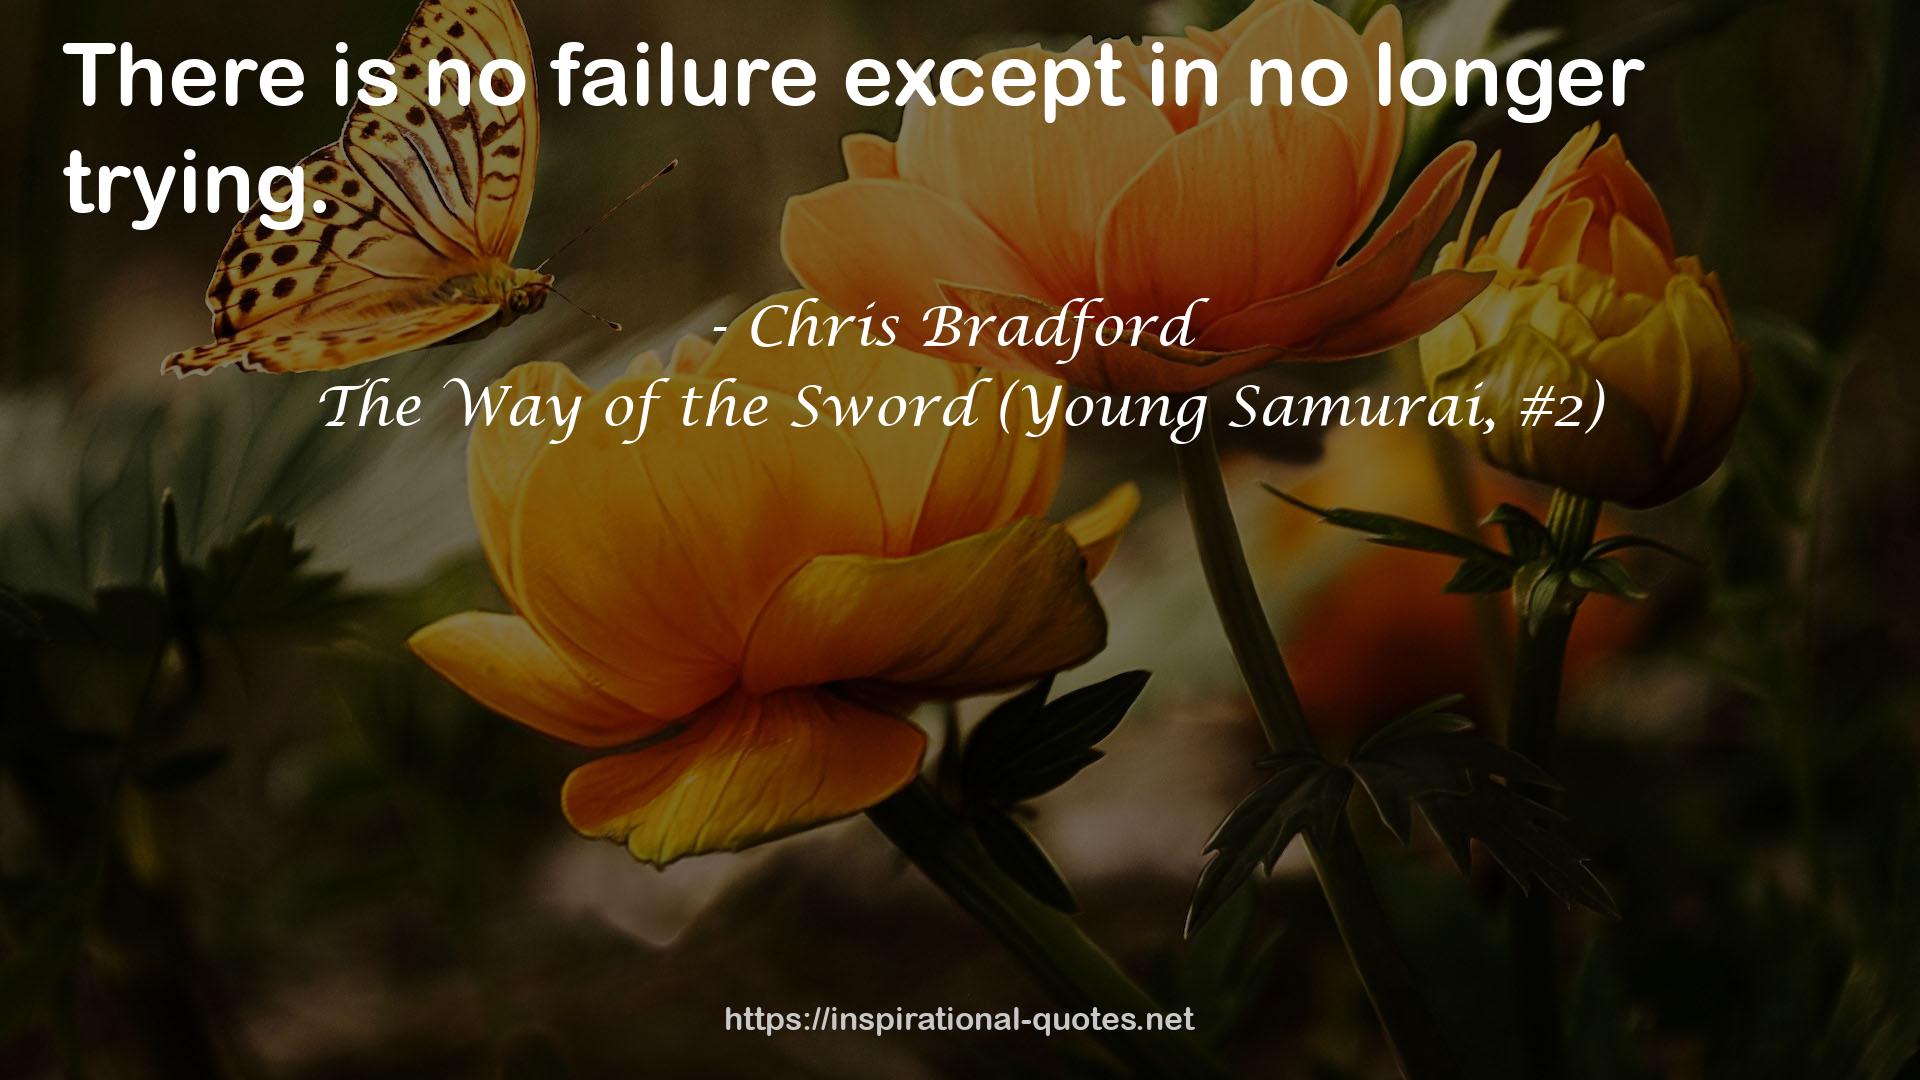 The Way of the Sword (Young Samurai, #2) QUOTES